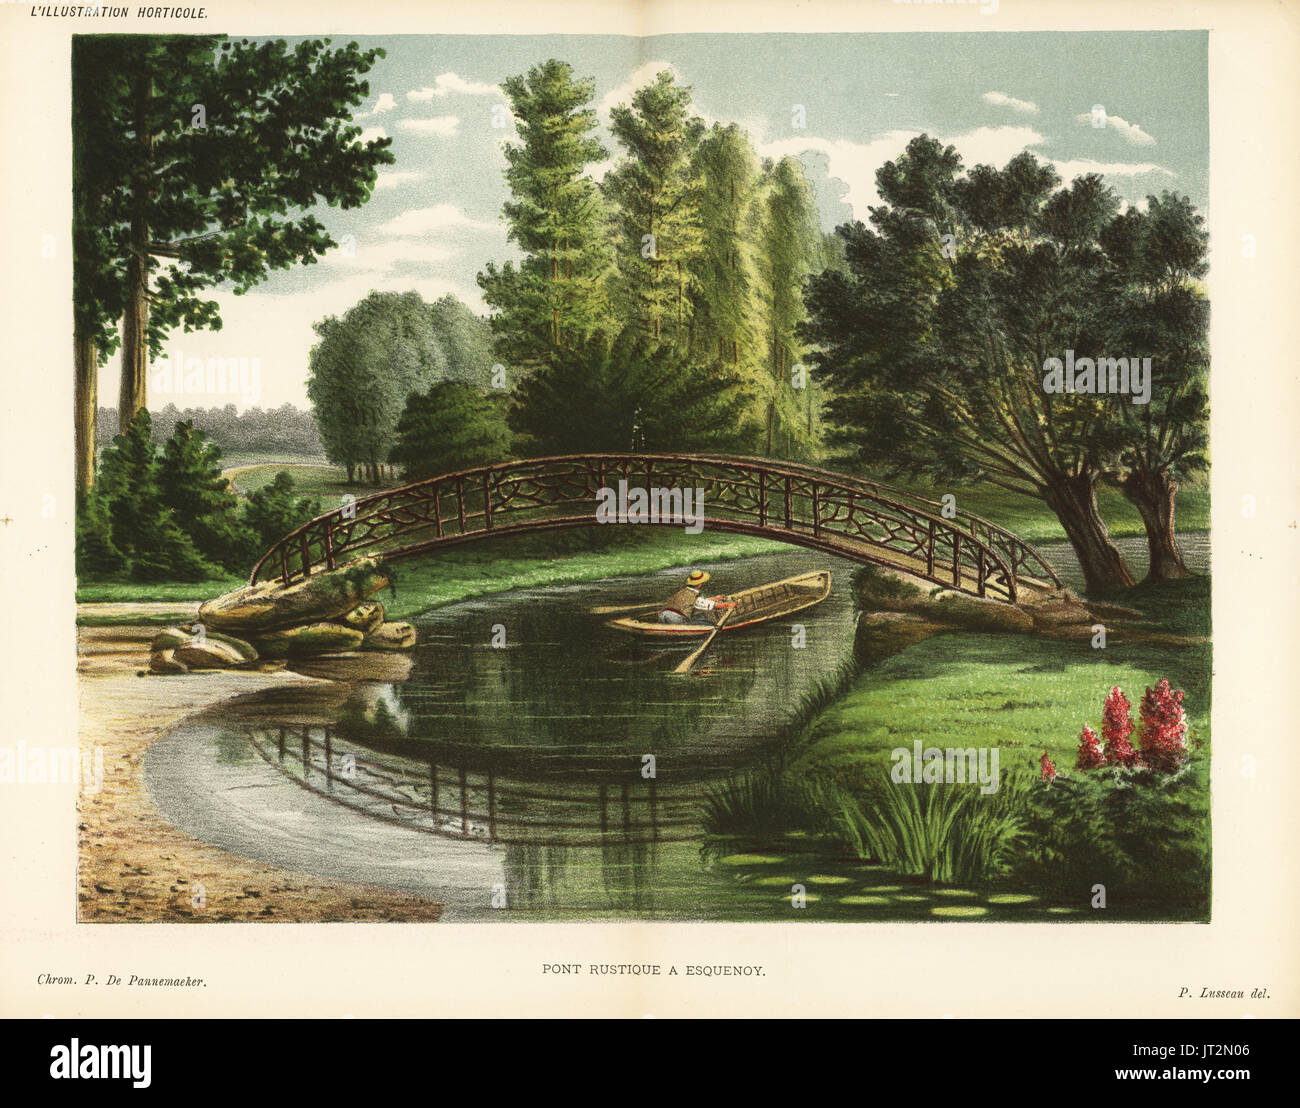 Rustic bridge at Esquenoy. Chromolithograph by Pieter de Pannemaeker from Jean Linden's l'Illustration Horticole, Brussels, 1885. Stock Photo